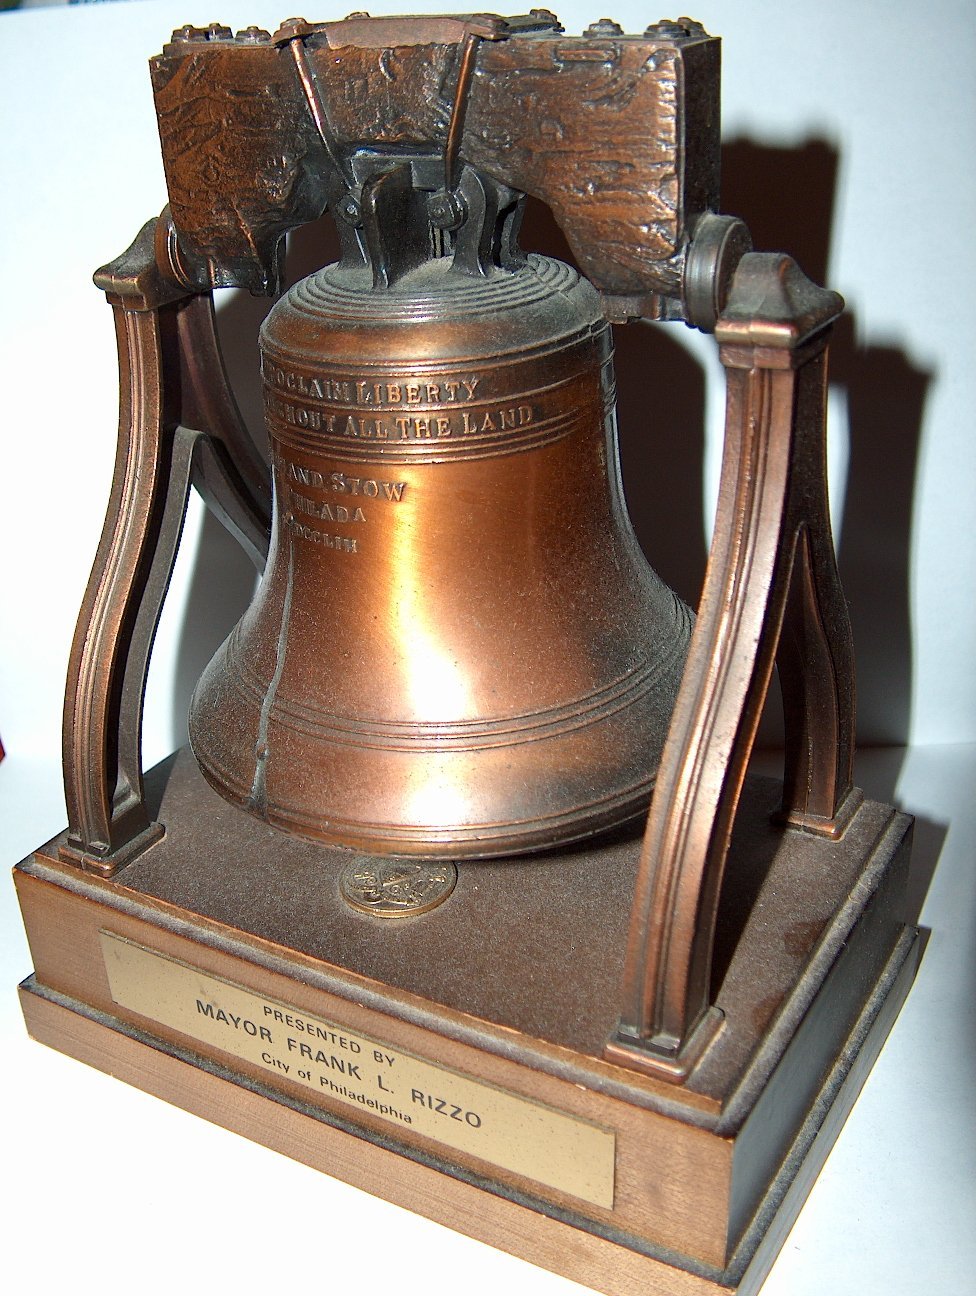 Liberty Bell presented to Valerie from Mayor Frank L. Rizzo  City of Philadelphia